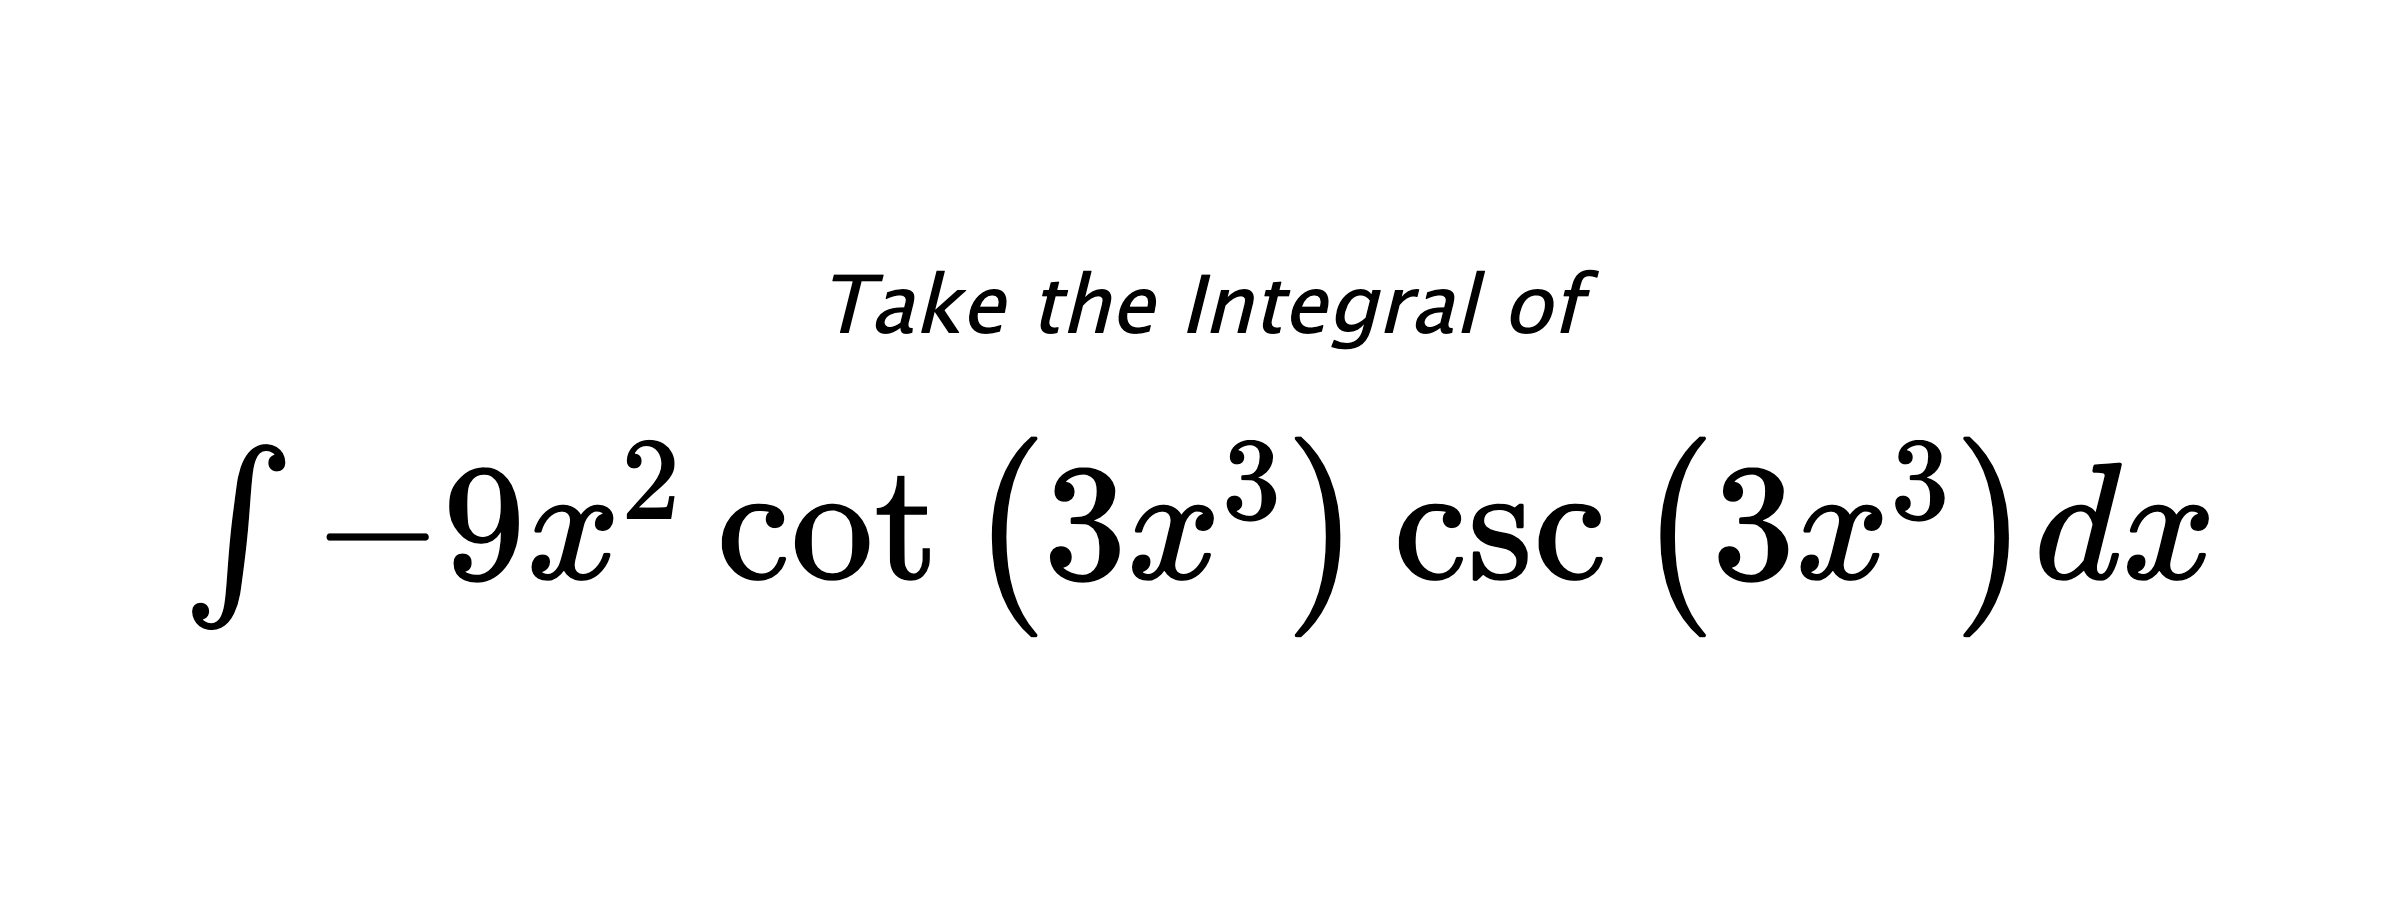 Take the Integral of $ \int - 9 x^{2} \cot{\left(3 x^{3} \right)} \csc{\left(3 x^{3} \right)} dx $